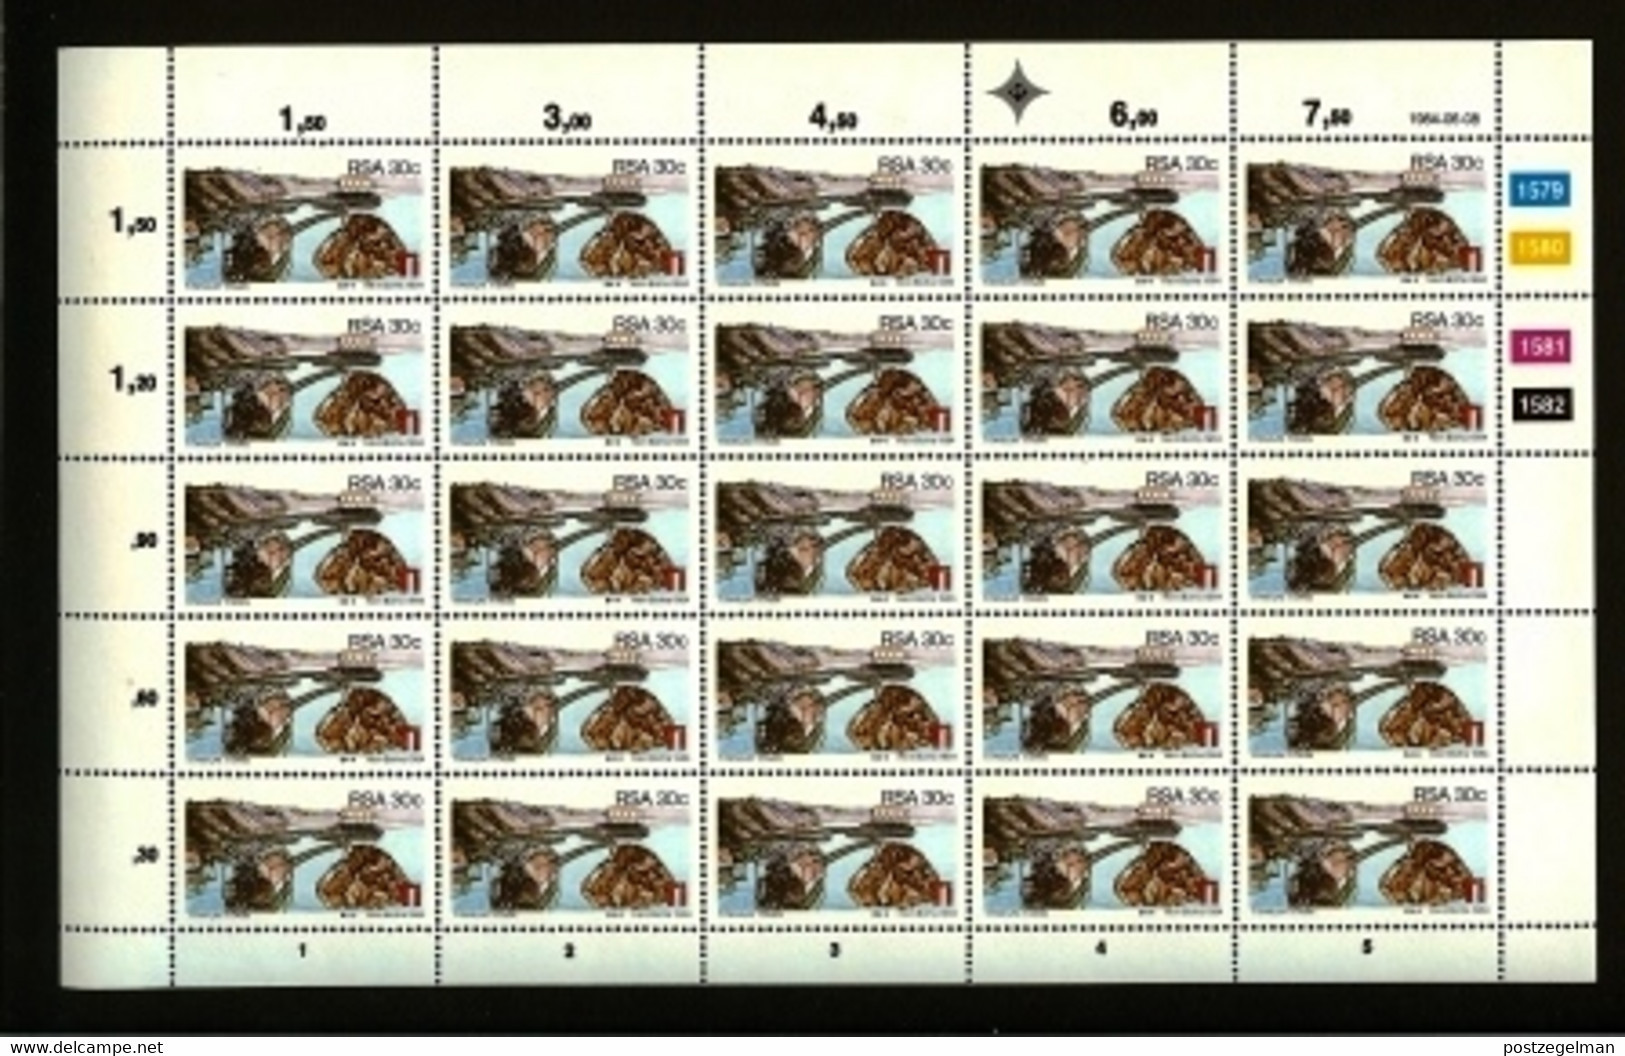 RSA, 1984, MNH, 25 Stamp(s) On Full Sheet(s), Minerals, Michell Nr(s).  647-650, Scannr. F2507 - Neufs